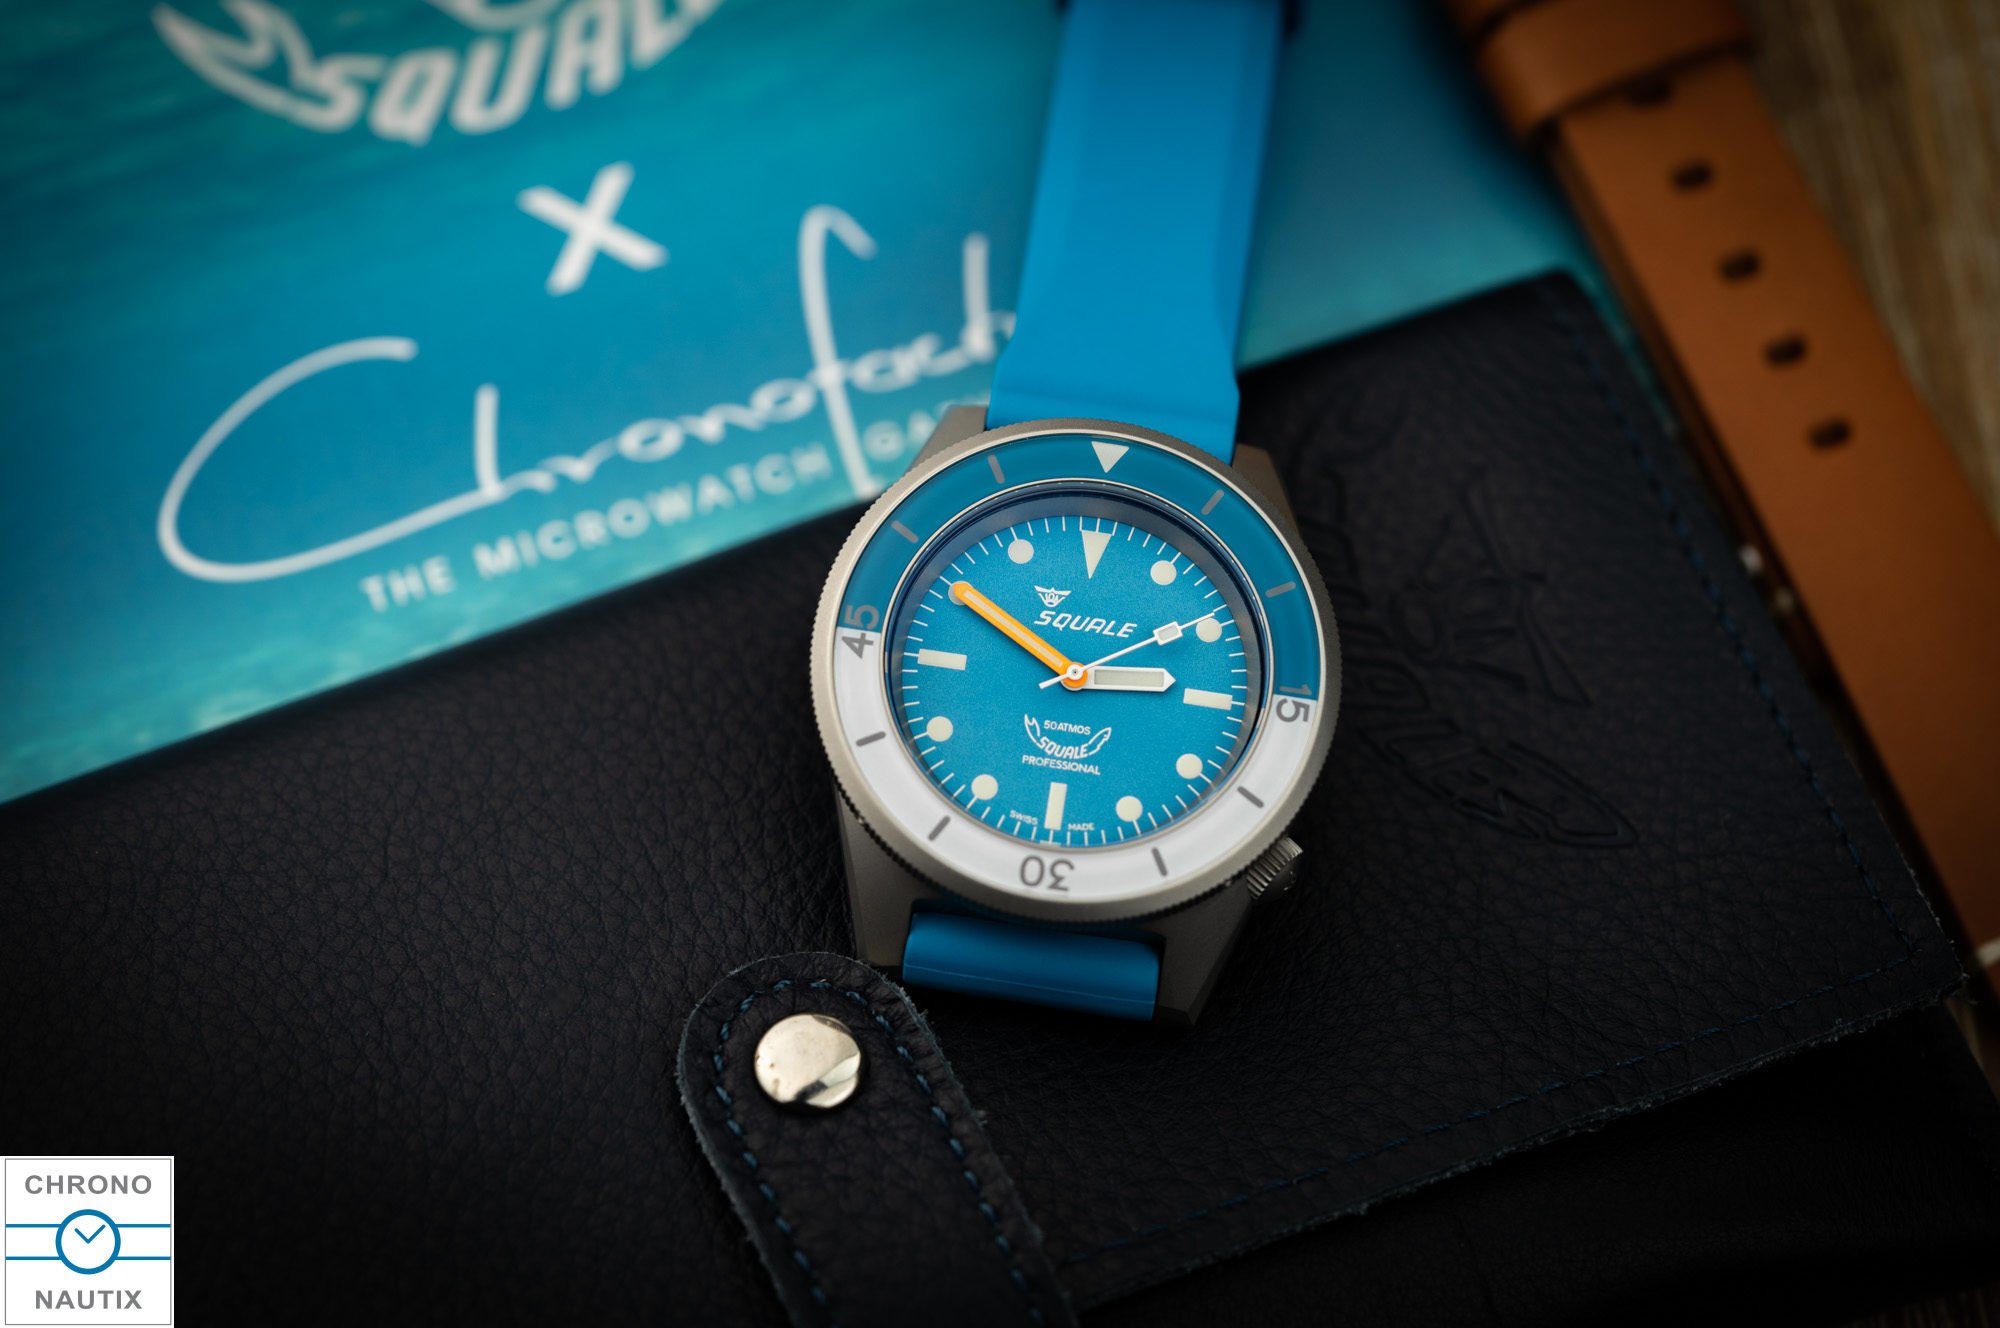 Squale x Chronofactum 1521 Squalo Bianco Special Edition Blasted Case Test 1